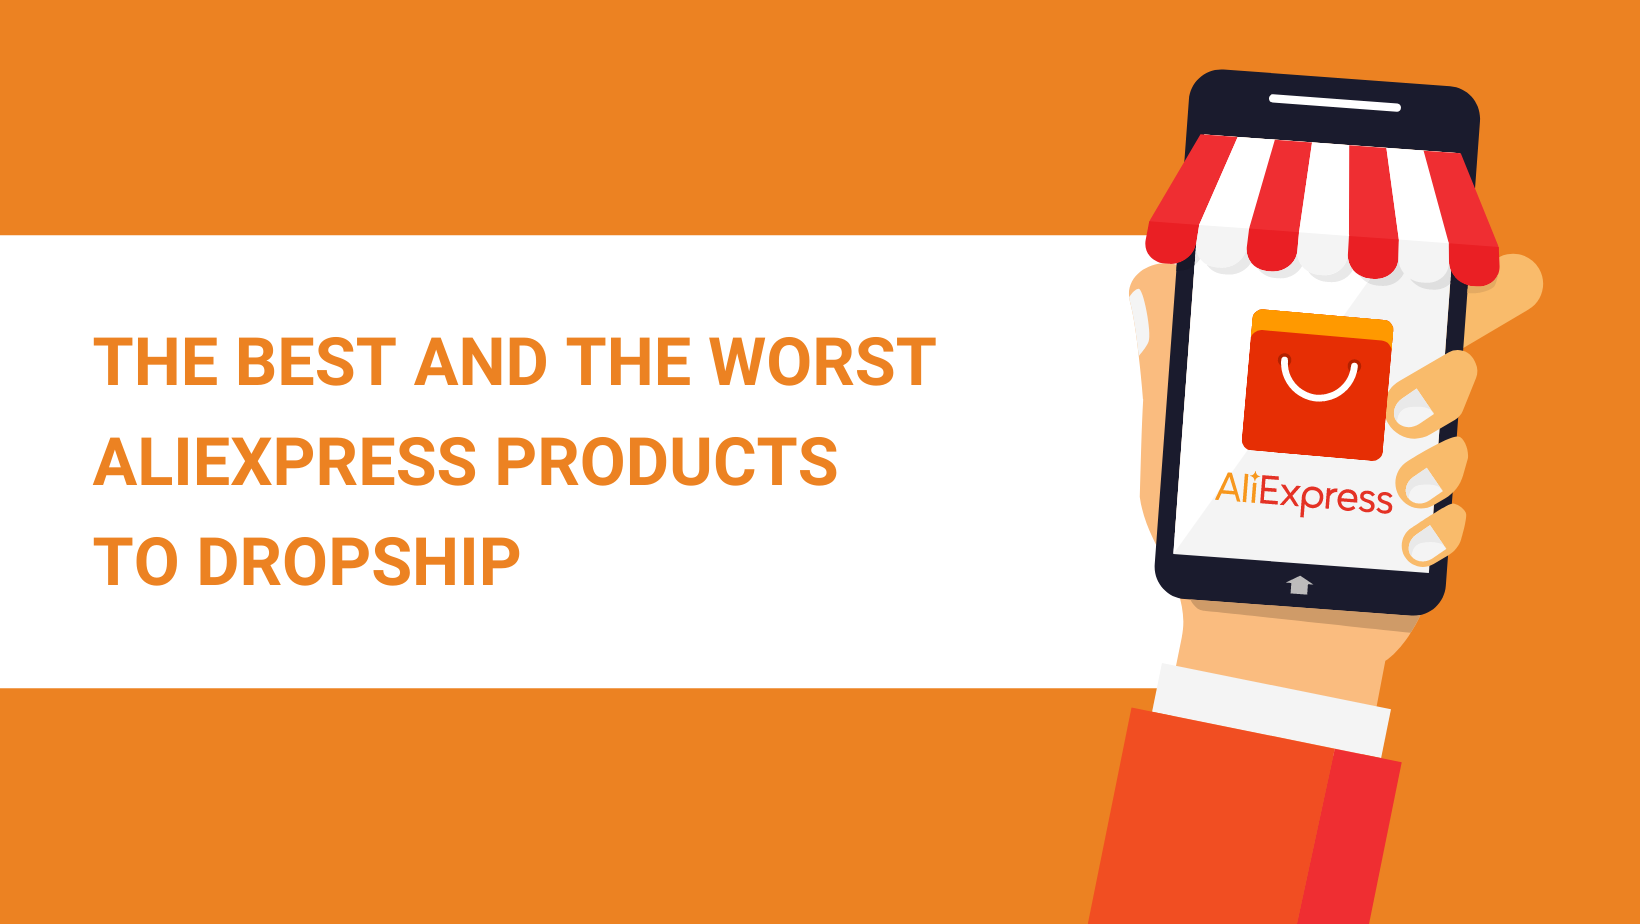 THE BEST AND THE WORST ALIEXPRESS PRODUCTS TO DROPSHIP